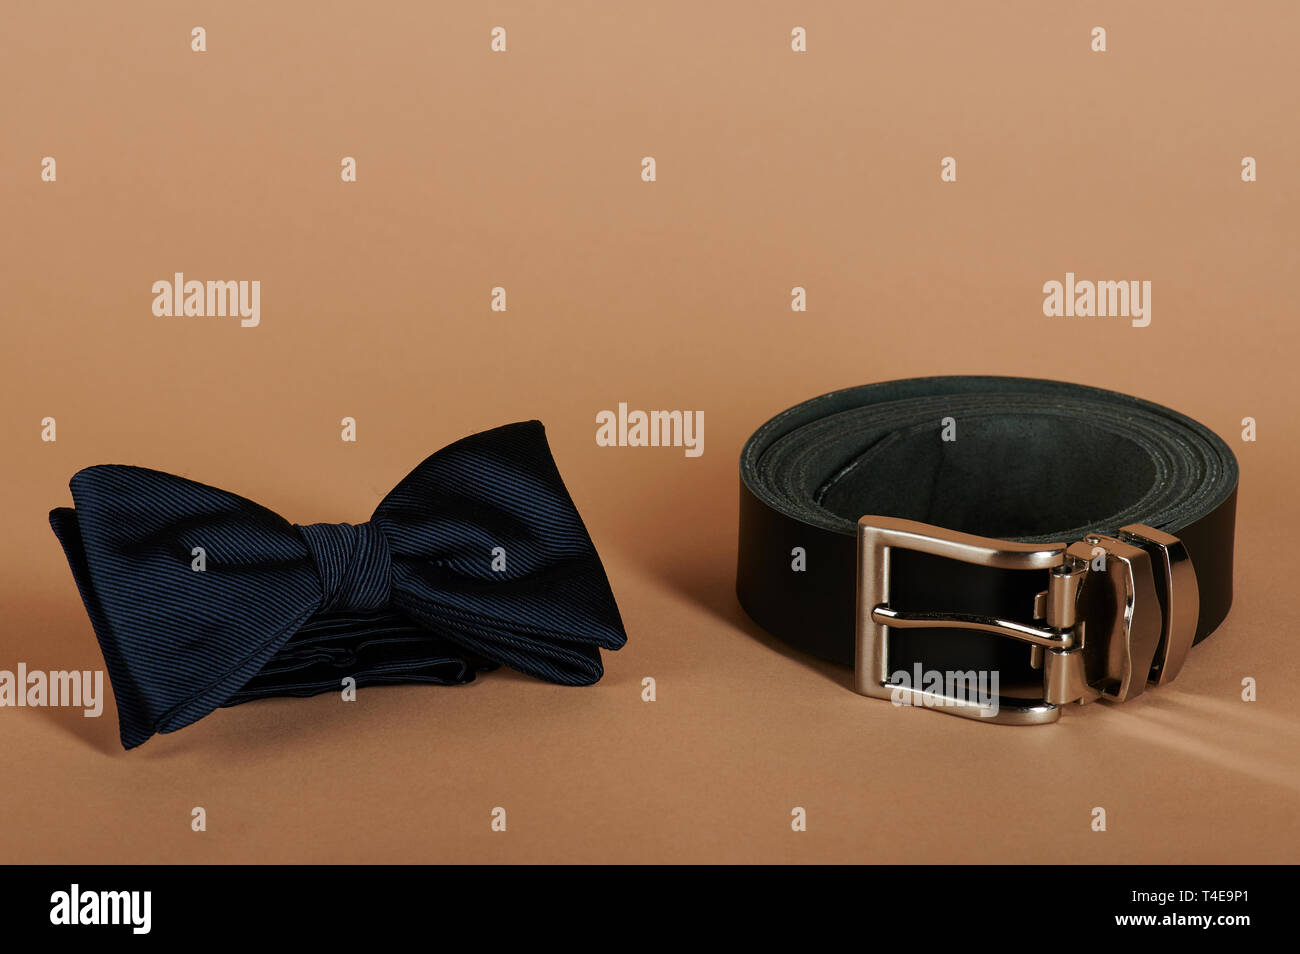 Blue bow tie and black belt on beige background close up view Stock Photo